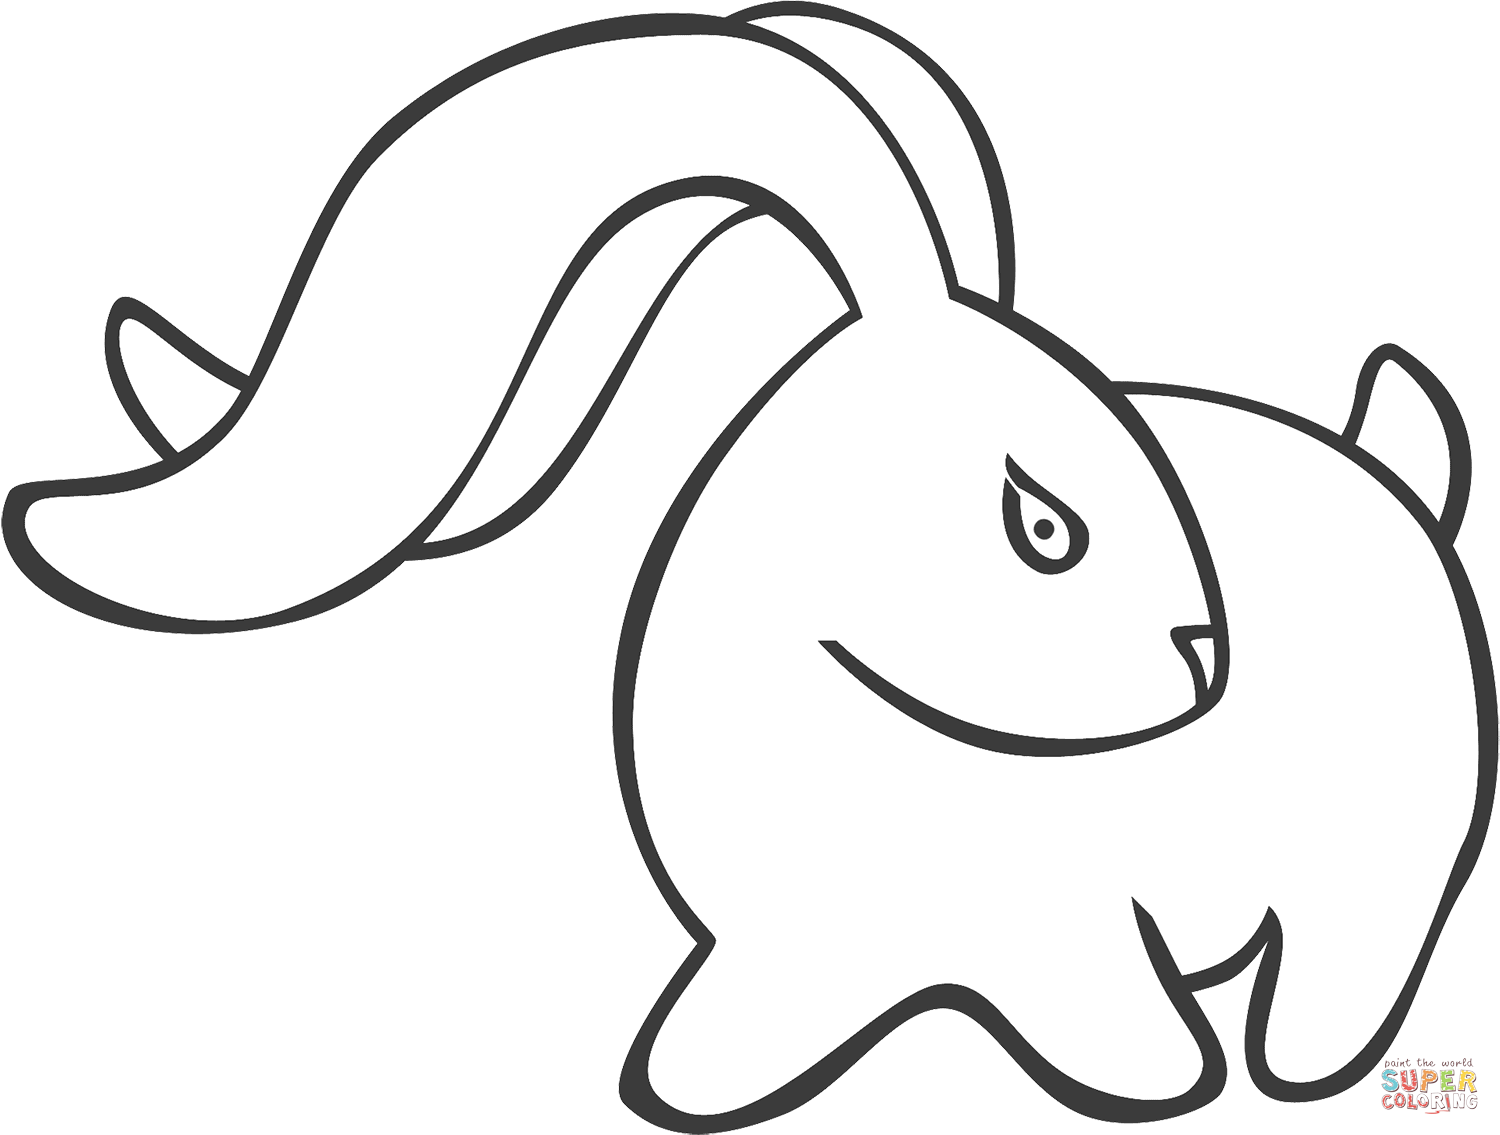 Rabbit with Long Ears coloring page | Free Printable Coloring Pages